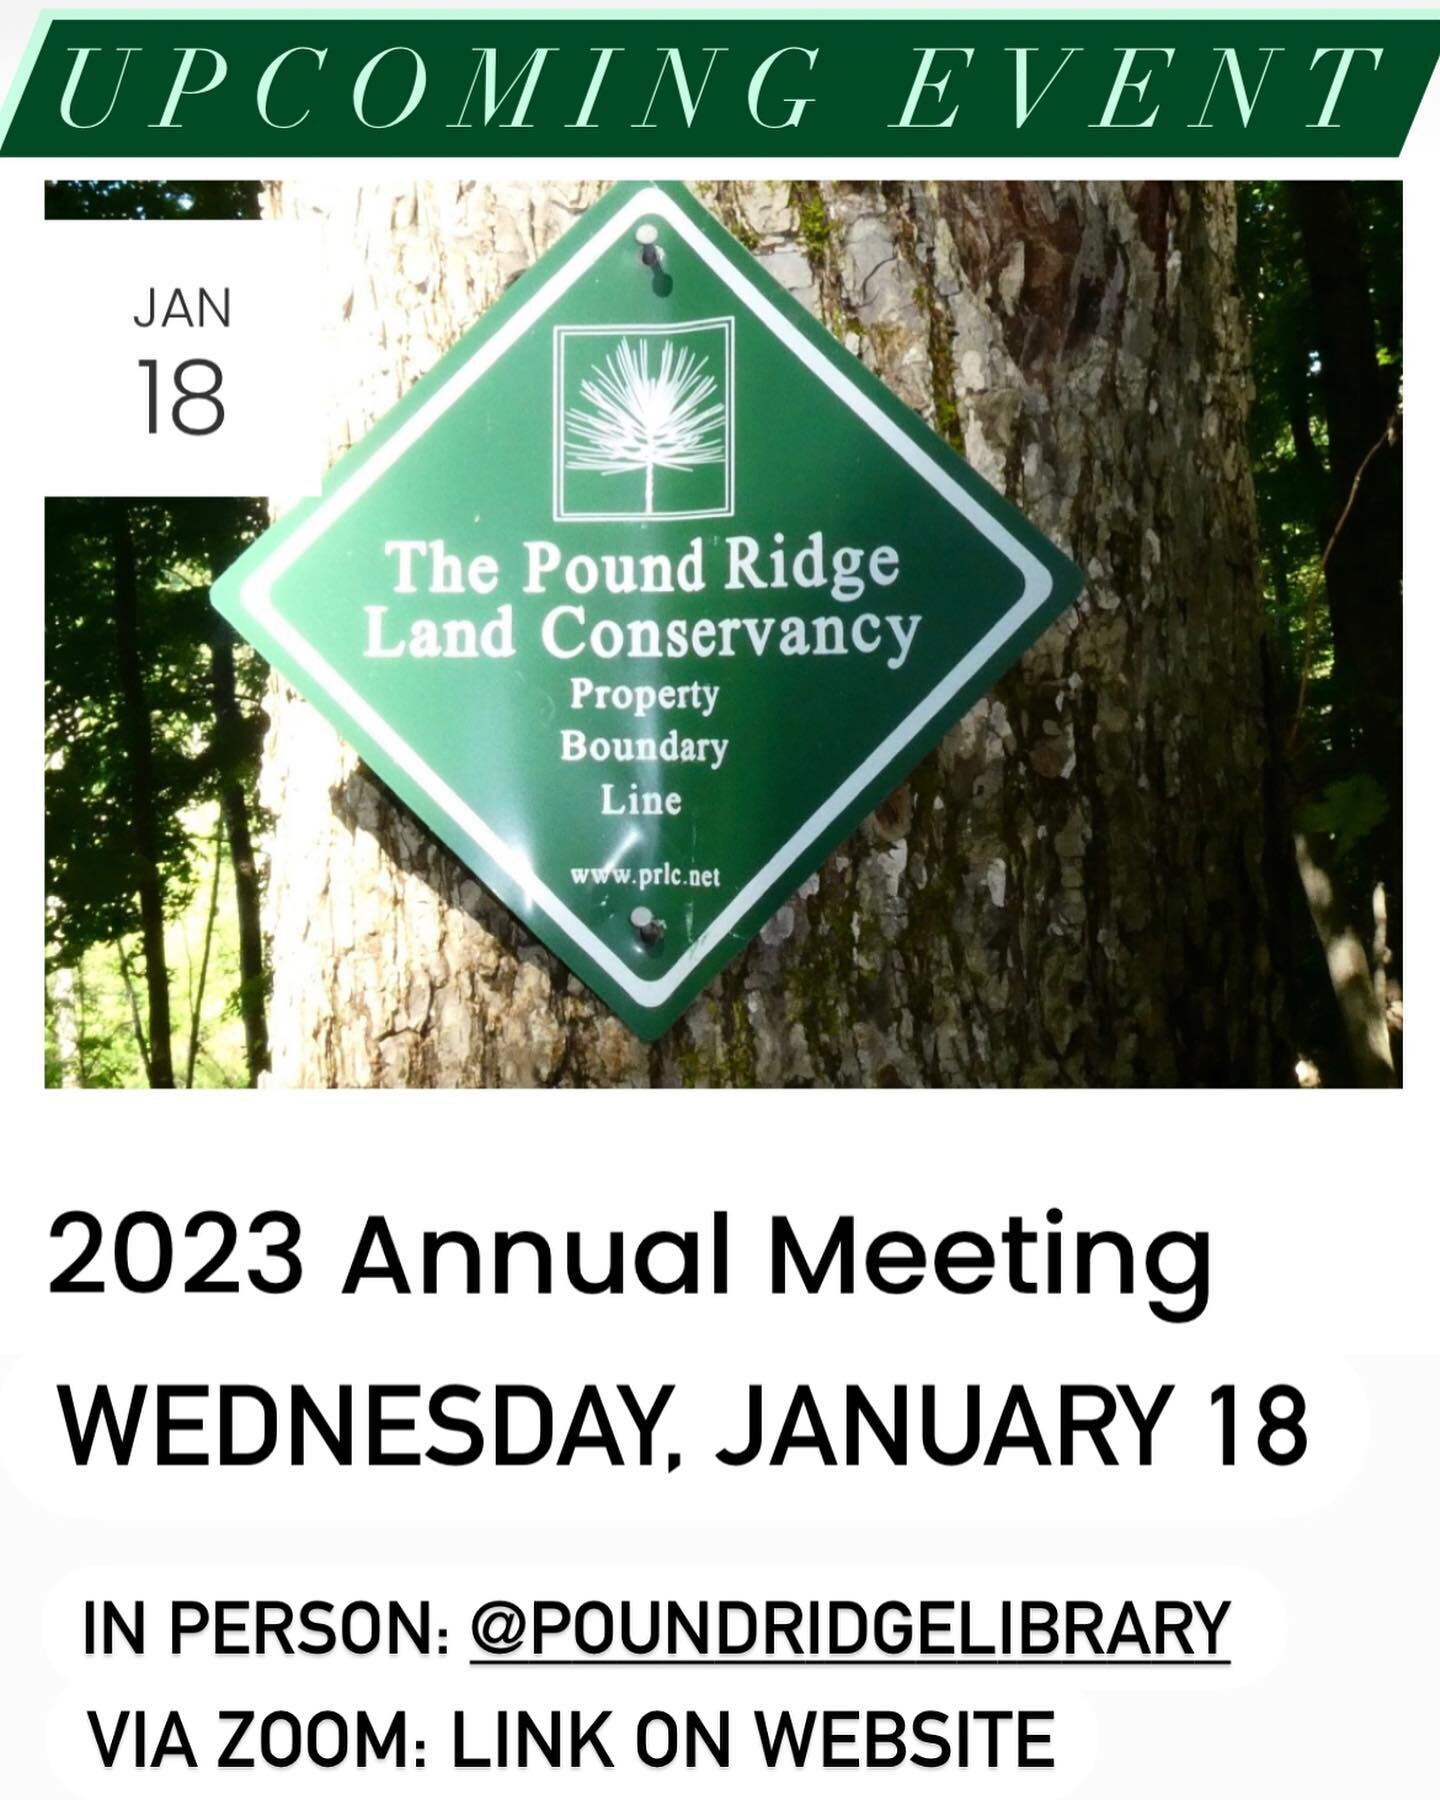 🗓️Upcoming Event🗓️ - Join us this Wednesday, January 18 for our 2023 Annual Meeting. We will share a recap of our progress in 2022 and discuss programming, outreach, and development goals for 2023. 🎉 Meet us in person at the Pound Ridge Library or